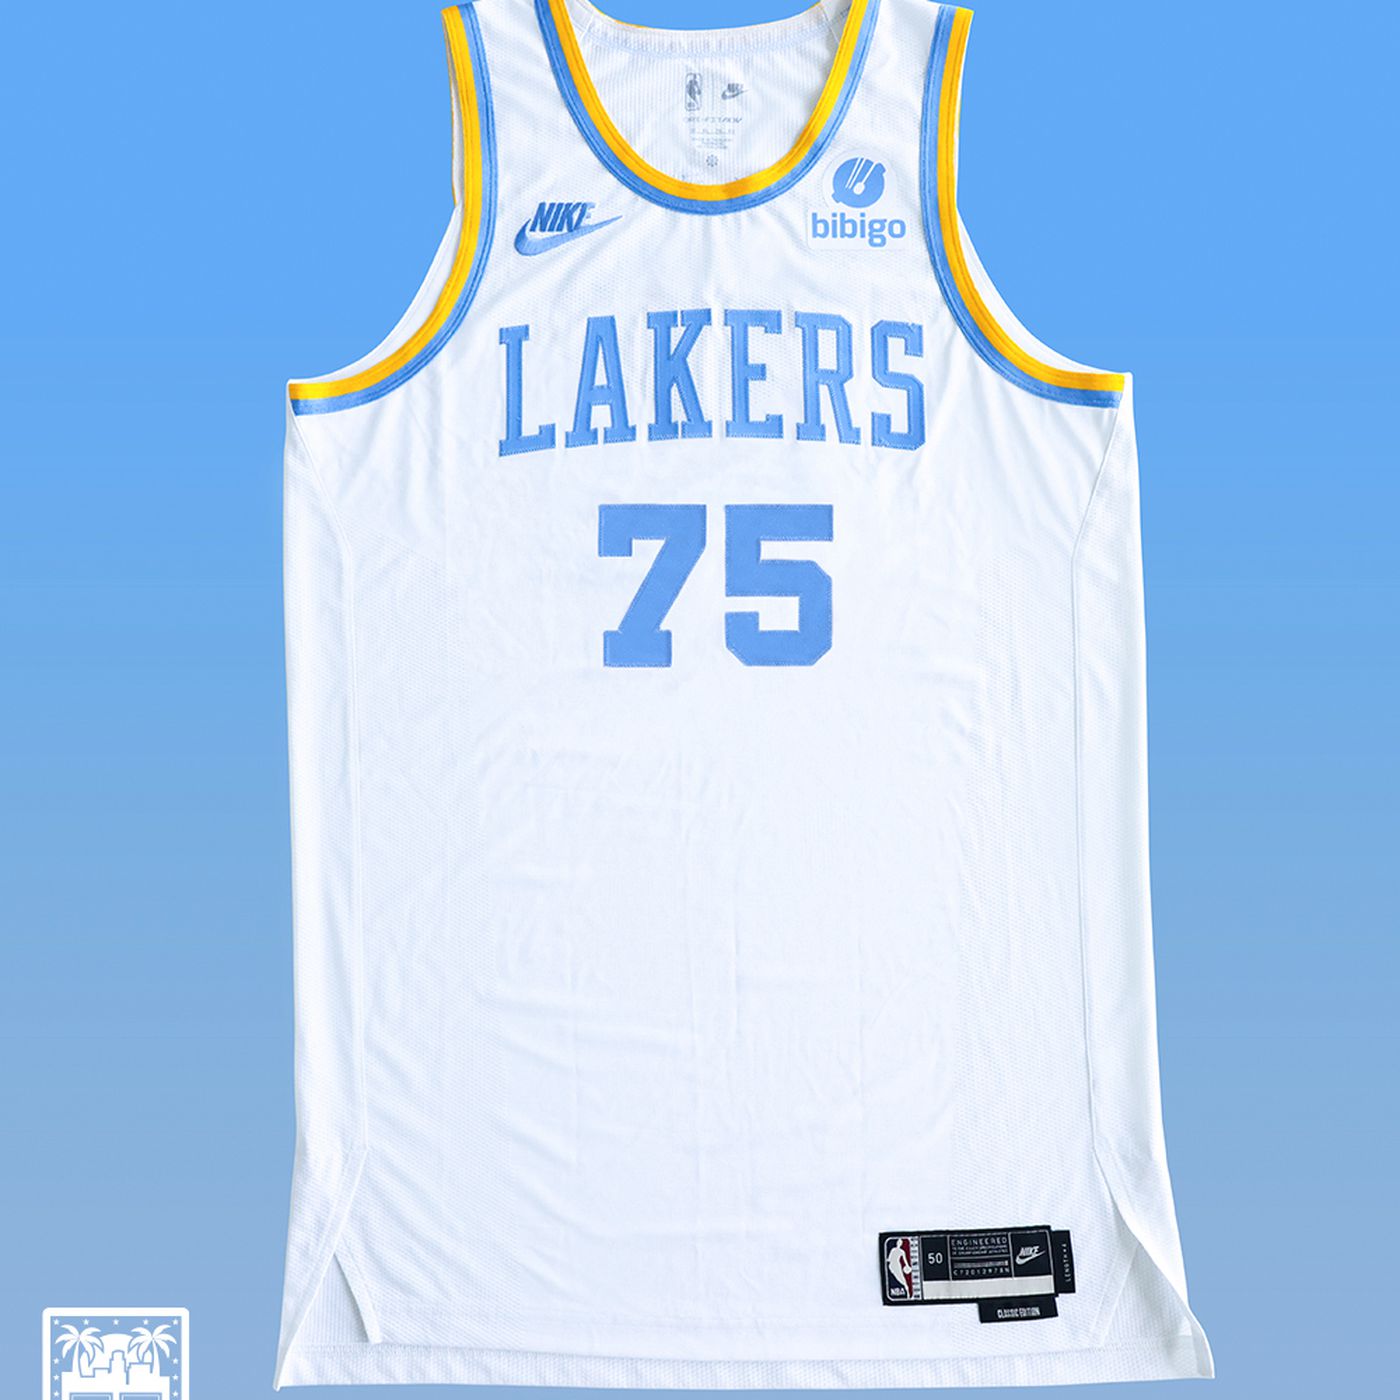 🏀 The Evolution of Los Angeles Lakers Basketball Jersey 2022